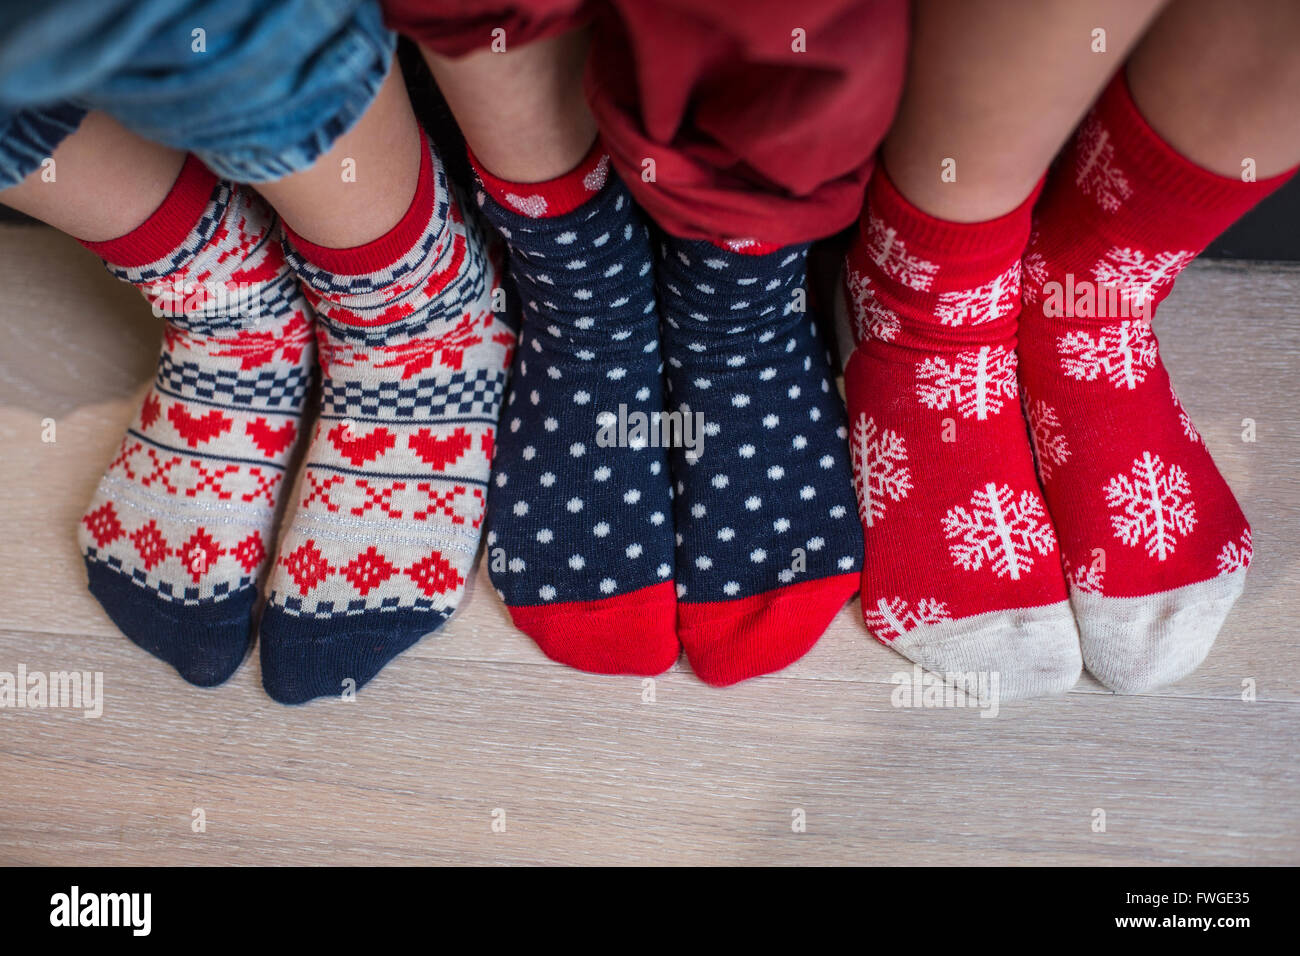 Three pairs of children's feet in bright patterned Christmas socks. Stock Photo